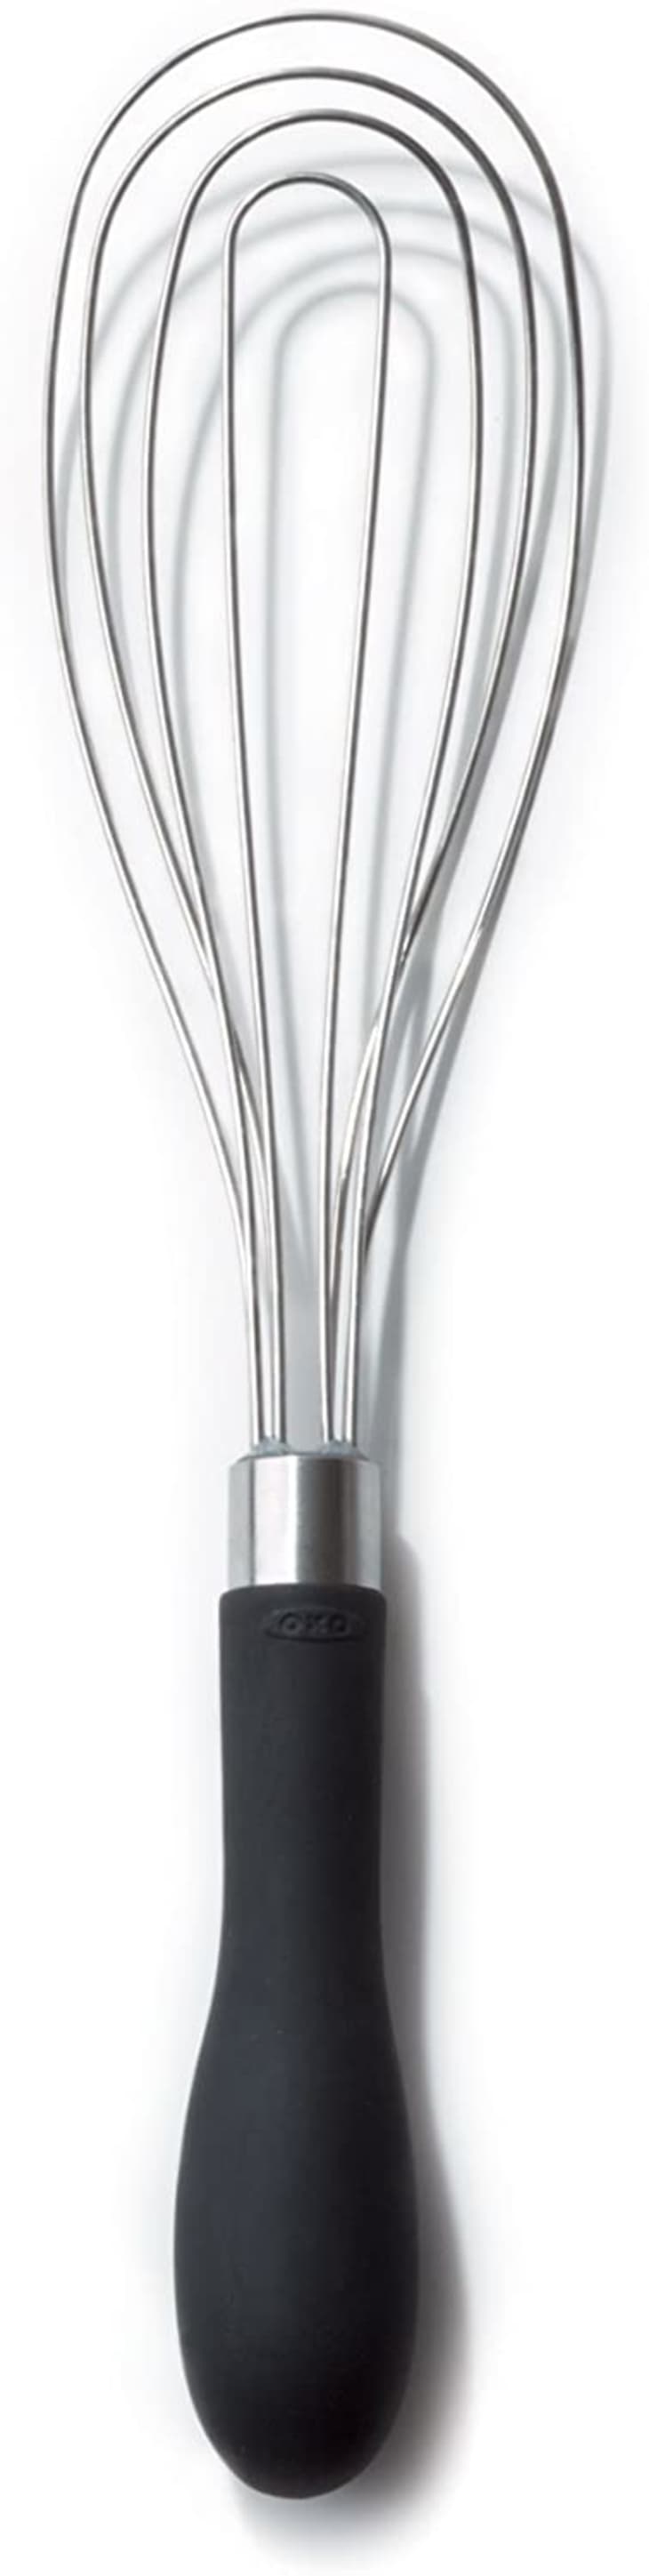 Product Image: OXO Good Grips Flat Whisk